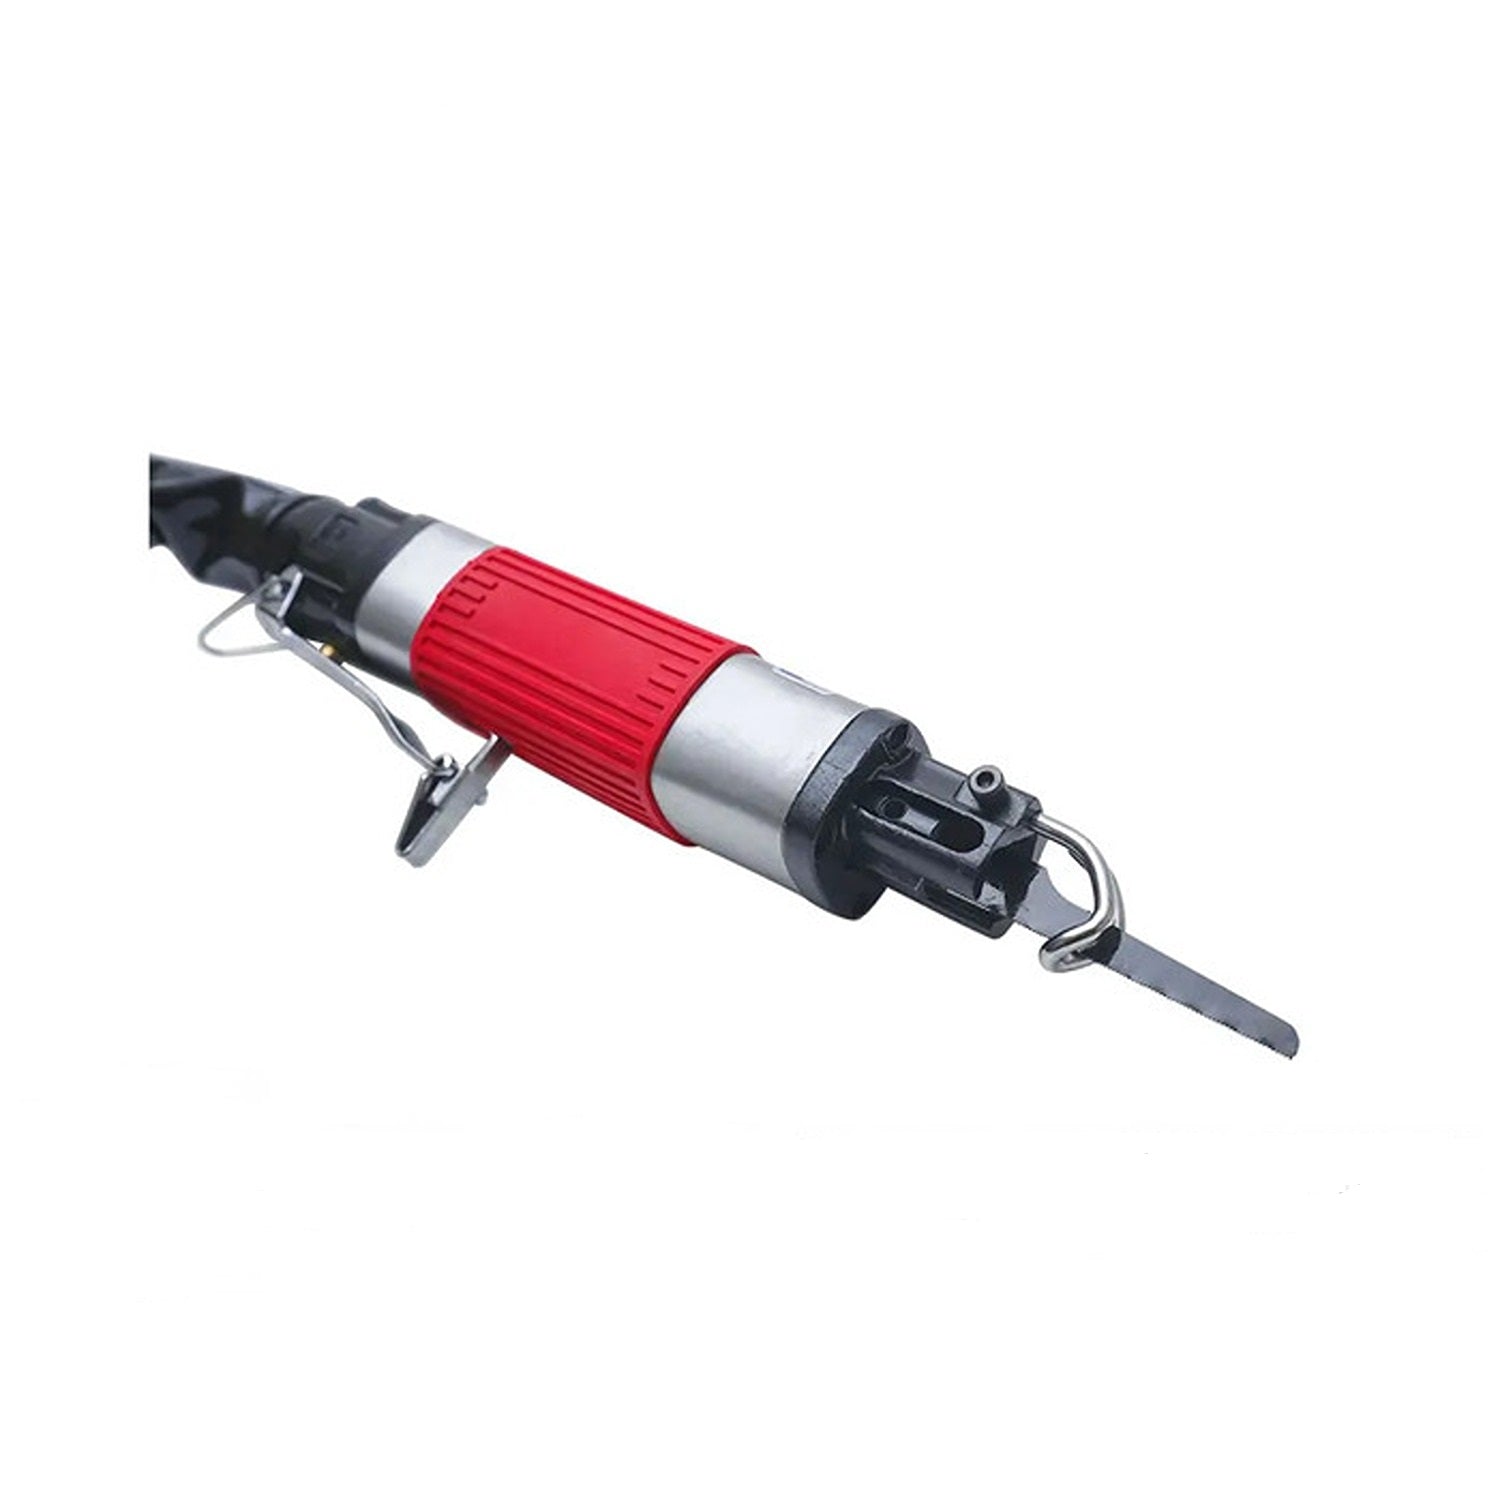 YEW AIK AB00040 Air Saw / File SP-1730 - 5.000 spm - Premium Air Saw from YEW AIK - Shop now at Yew Aik.